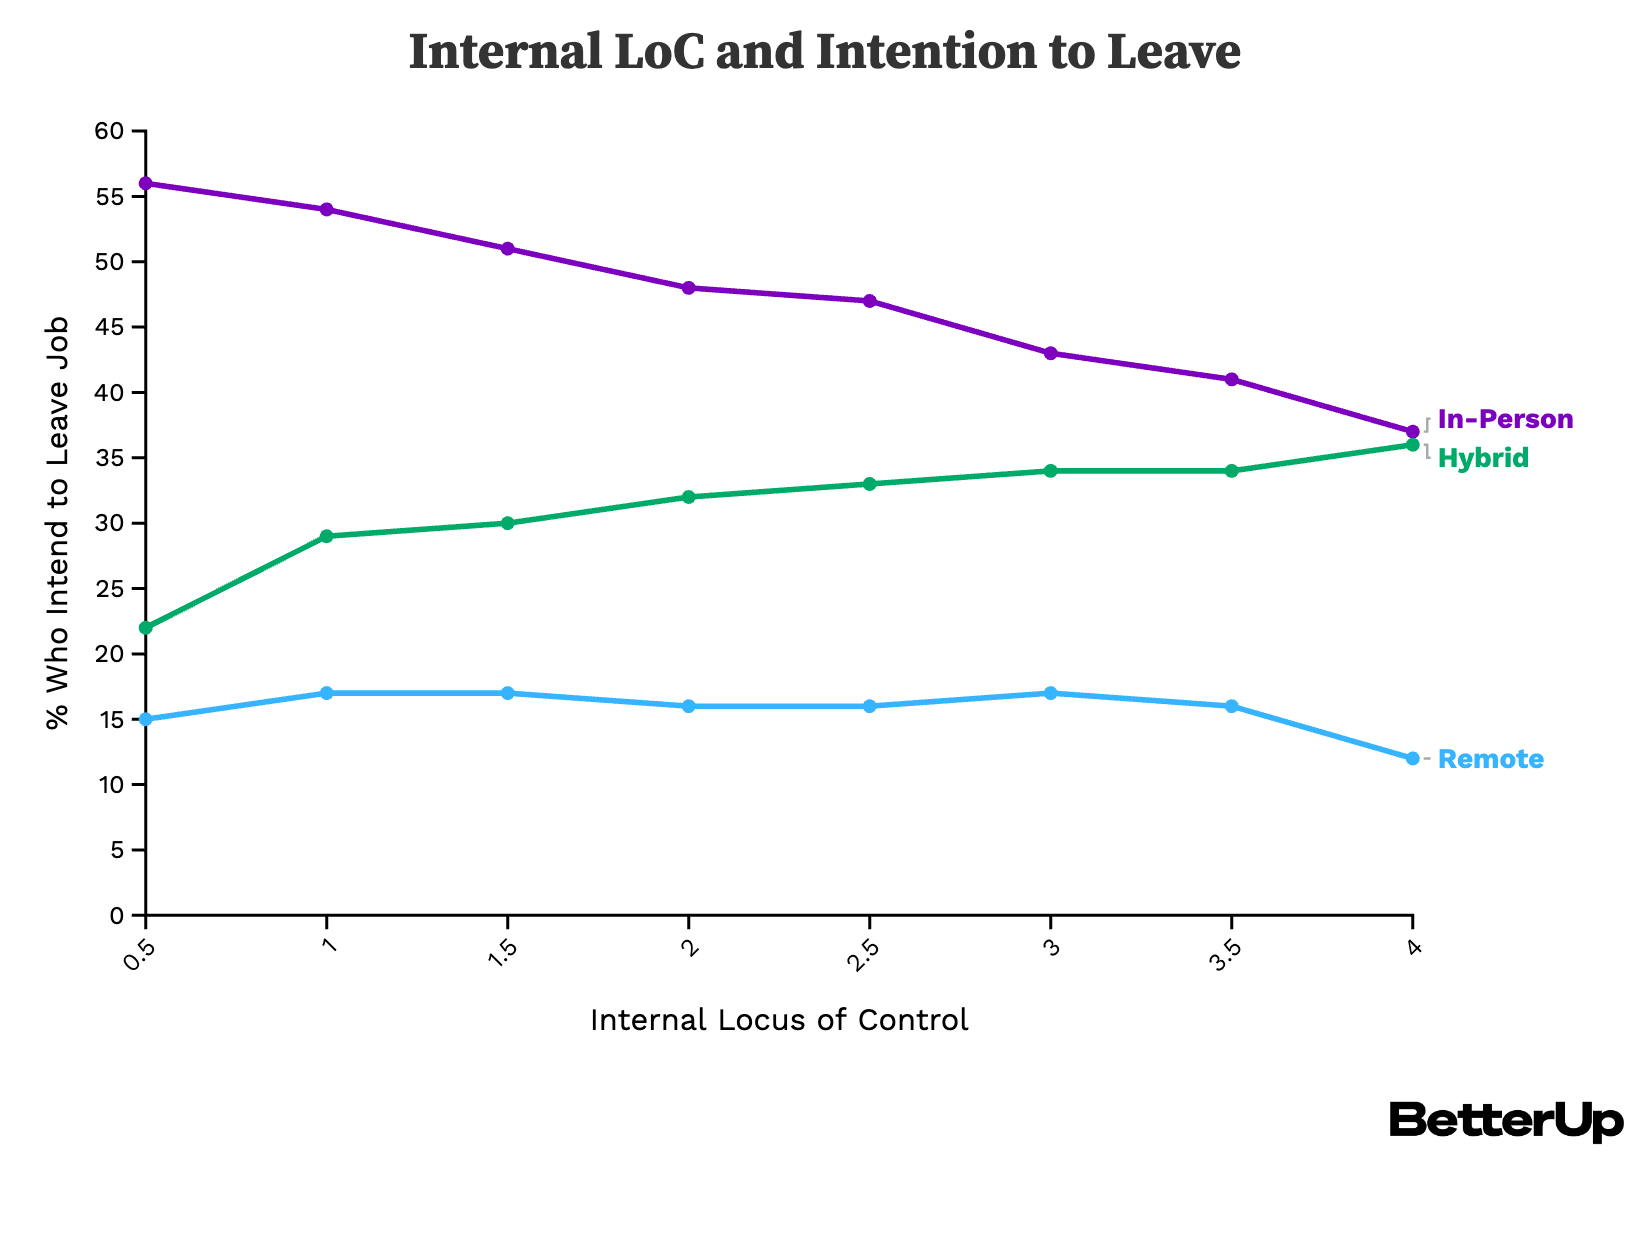 line graph showing internal locus of control and intention to leave between hybrid, in-person, and remote workers.